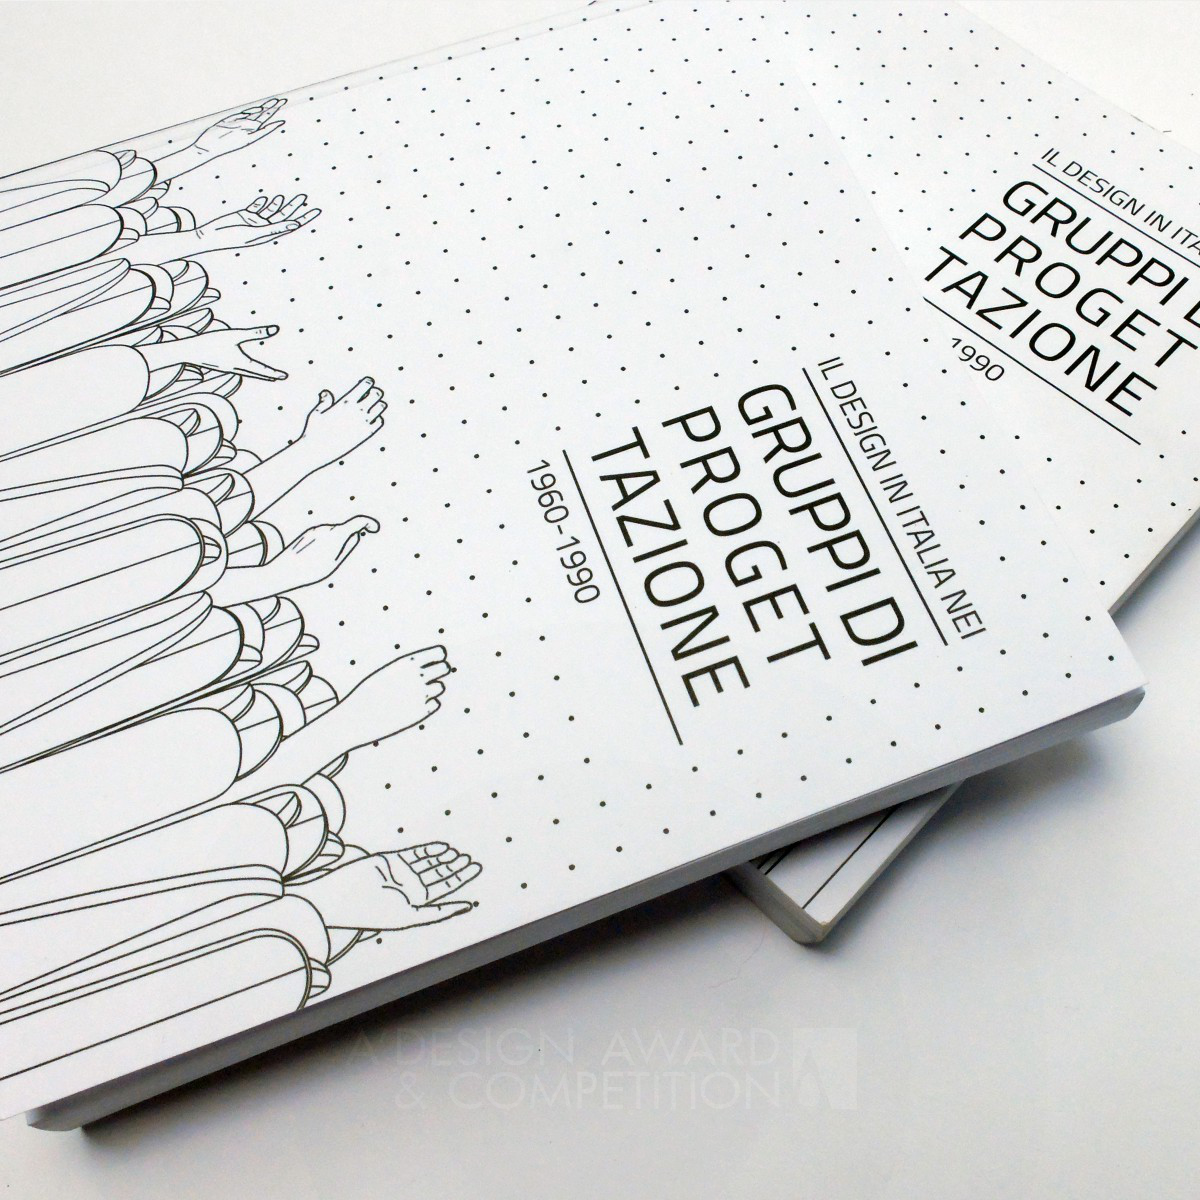 Design in Italy in Project Groups Thesis Book